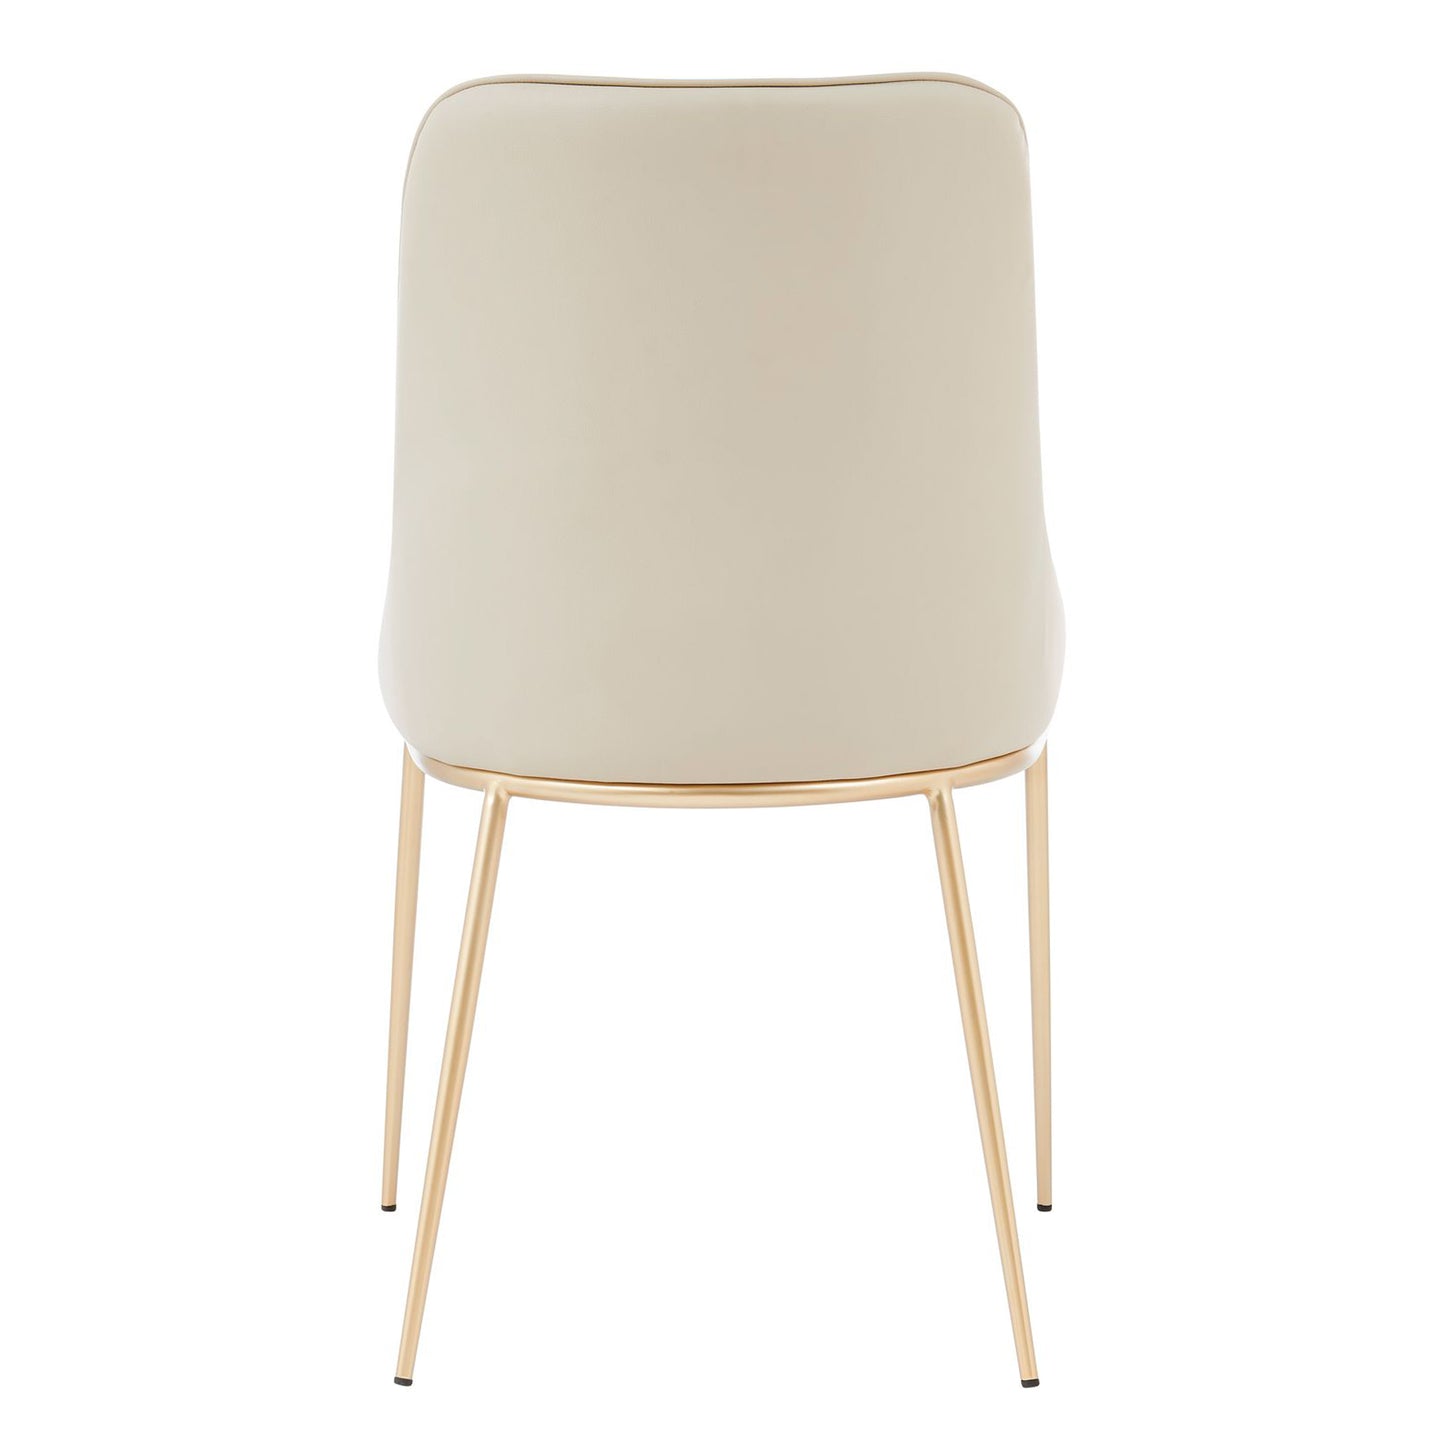 Beige Faux Leather And Gold Dining Chair